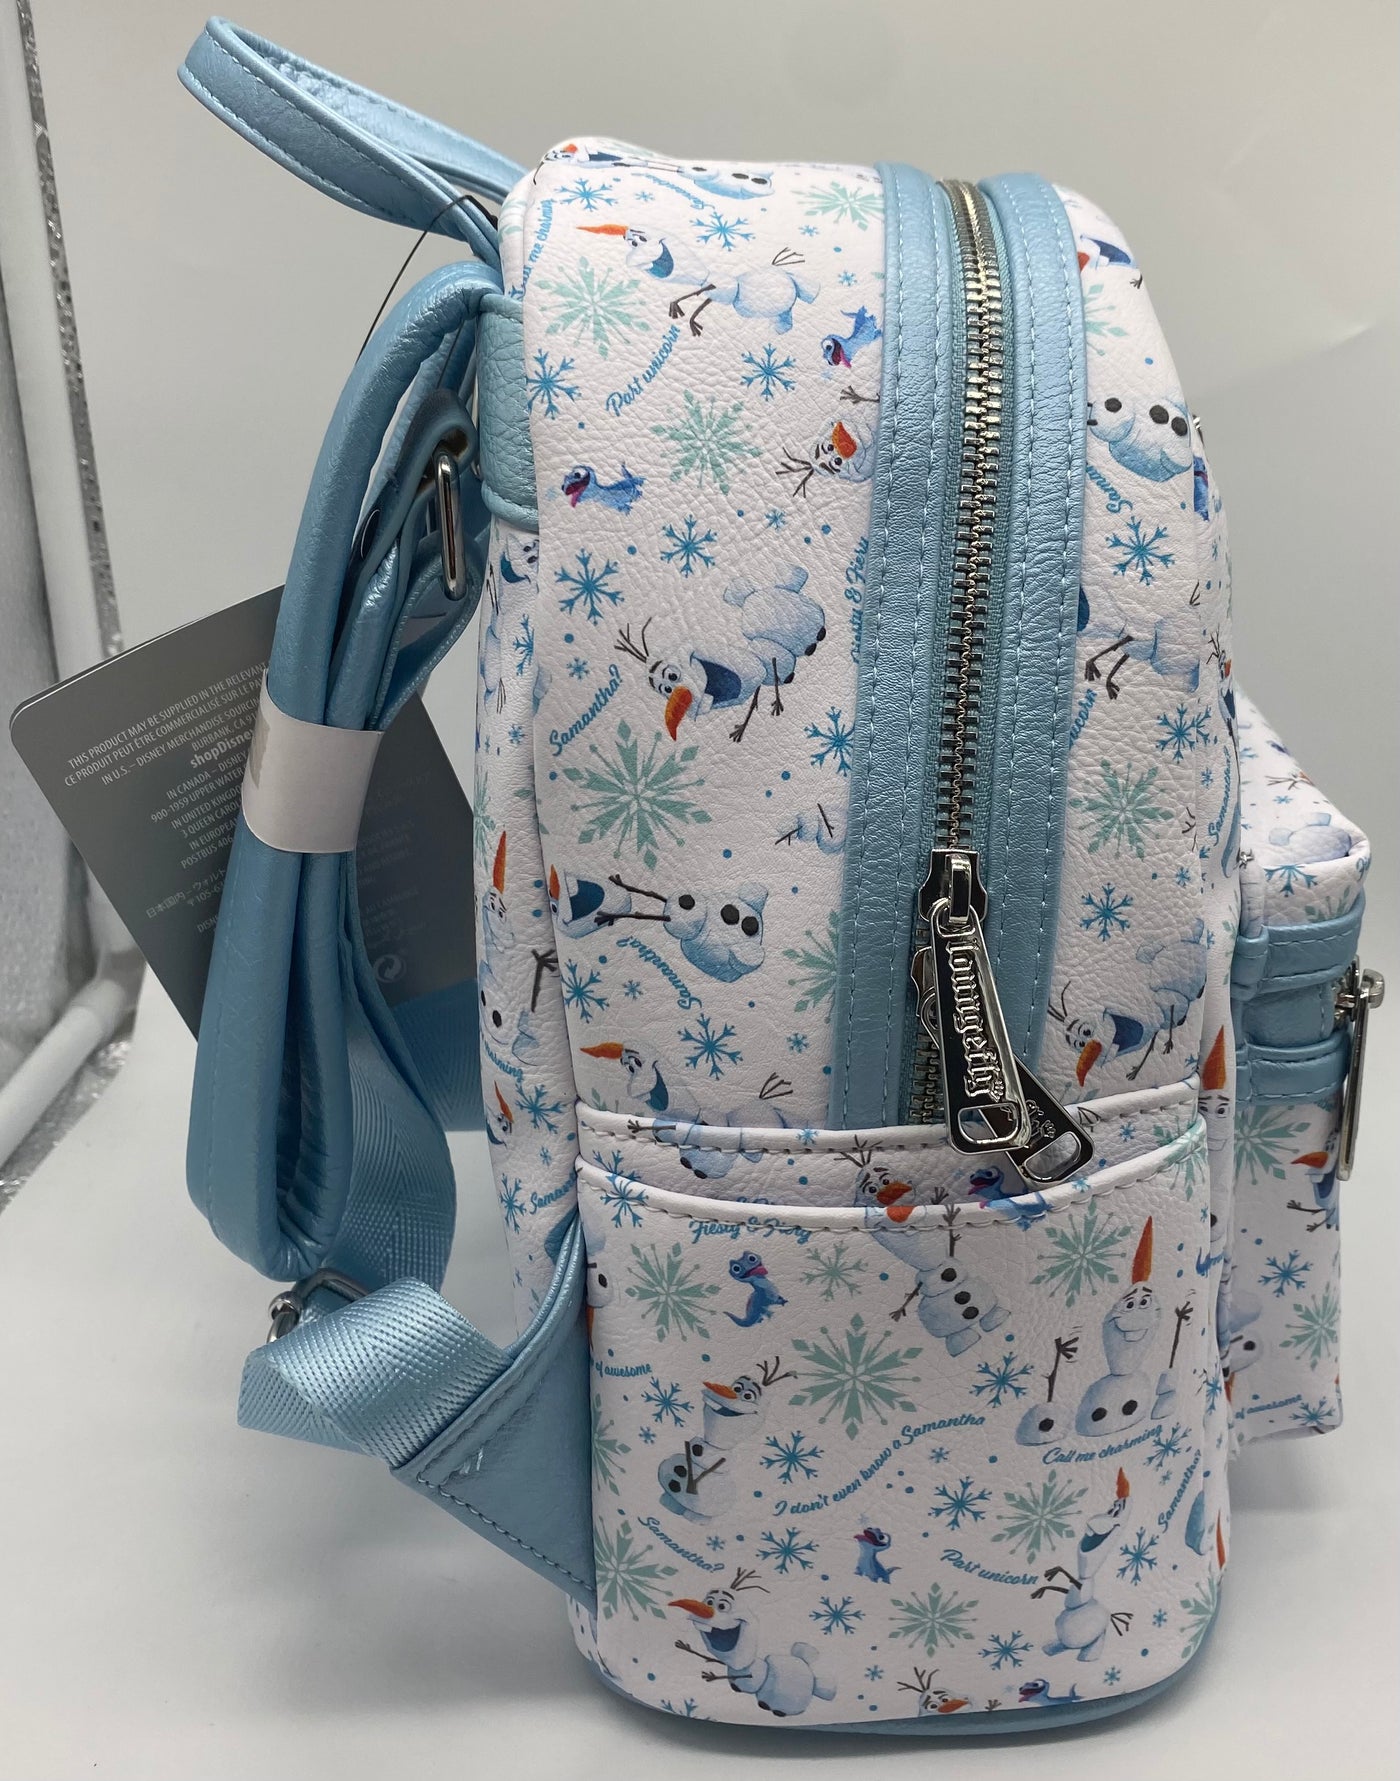 Disney Parks Frozen 2 Olaf Bruni Mini Backpack Loungefly New with Tags